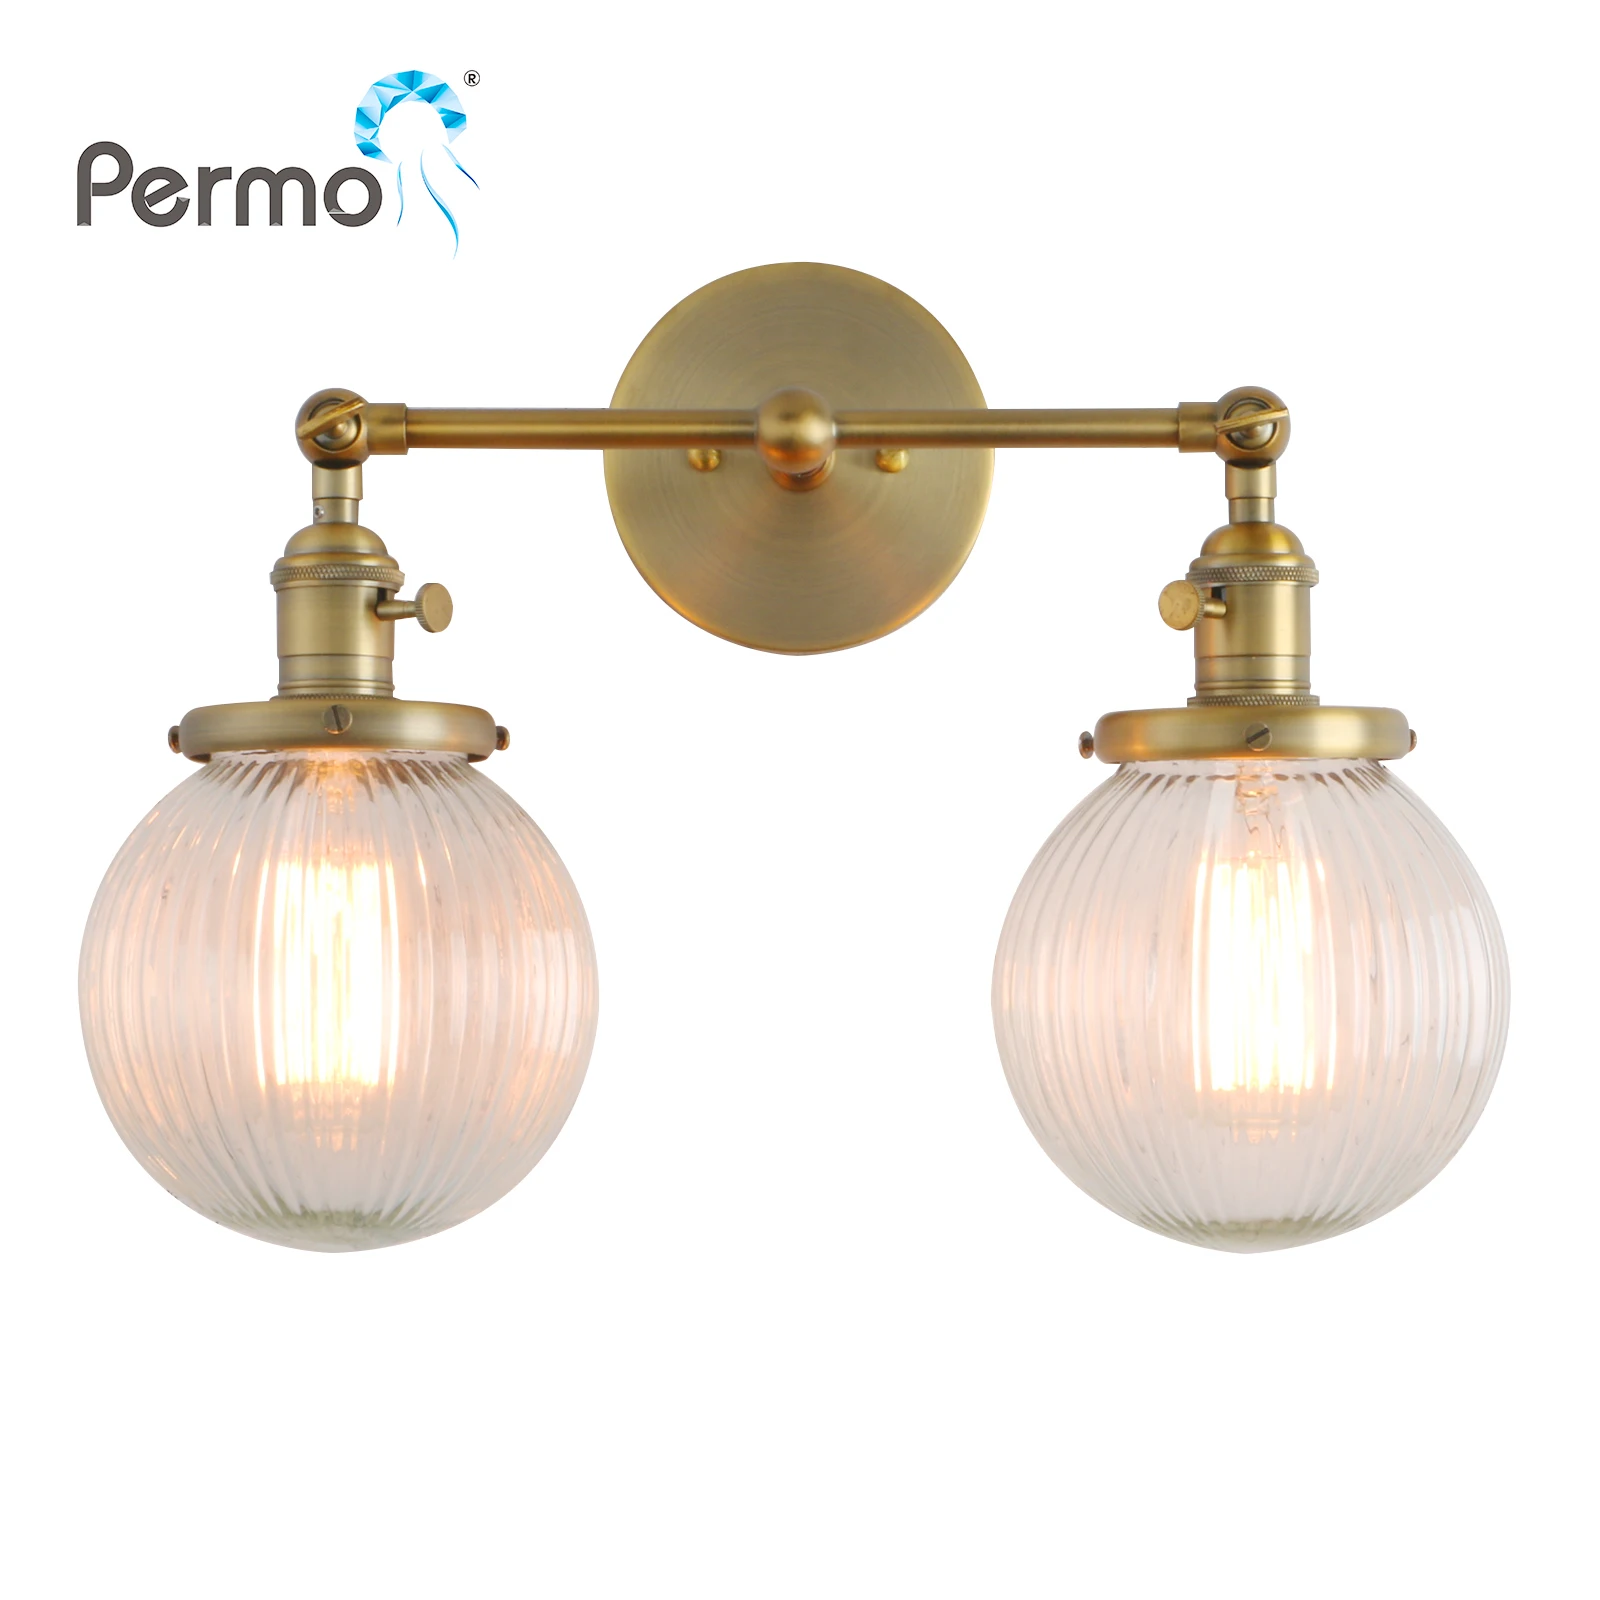 Permo Vintage  with Globe Glass Shade 2 Lights Wall Sconces Double Head Wall Lights with Switch Retro Style Rustic Wall Lamps